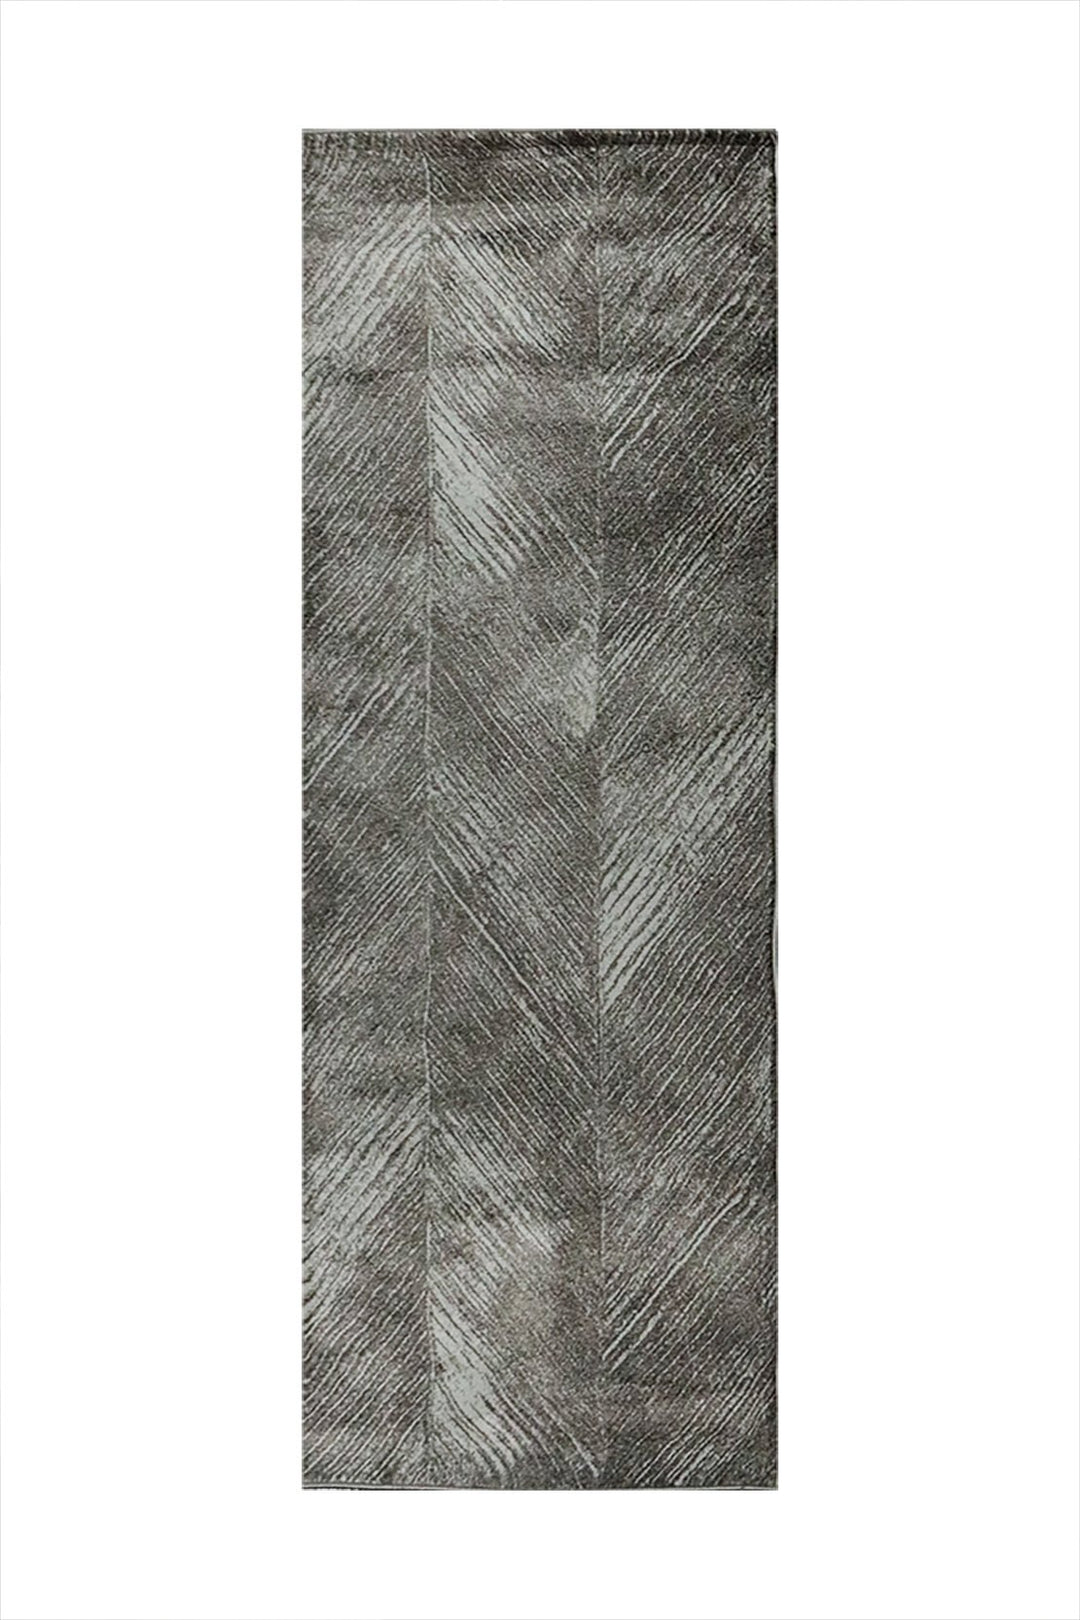 Turkish Modern Festival WD Rug - 3.1 x 8.0 FT - Brown - Sleek and Minimalist for Chic Interiors - V Surfaces